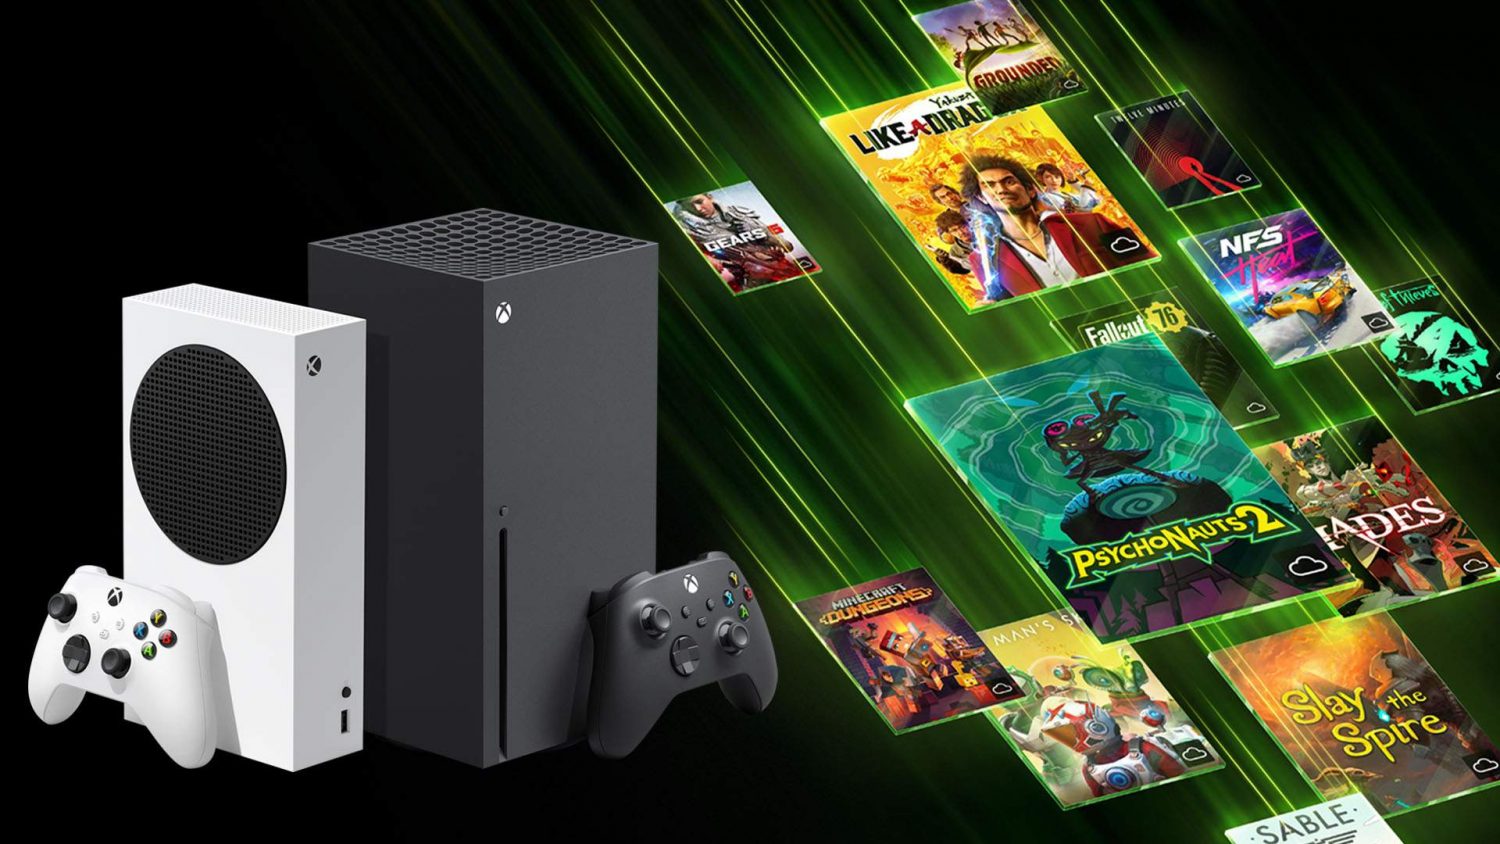 xbox-cloud-gaming-disponible-xbox-one-xbox-series